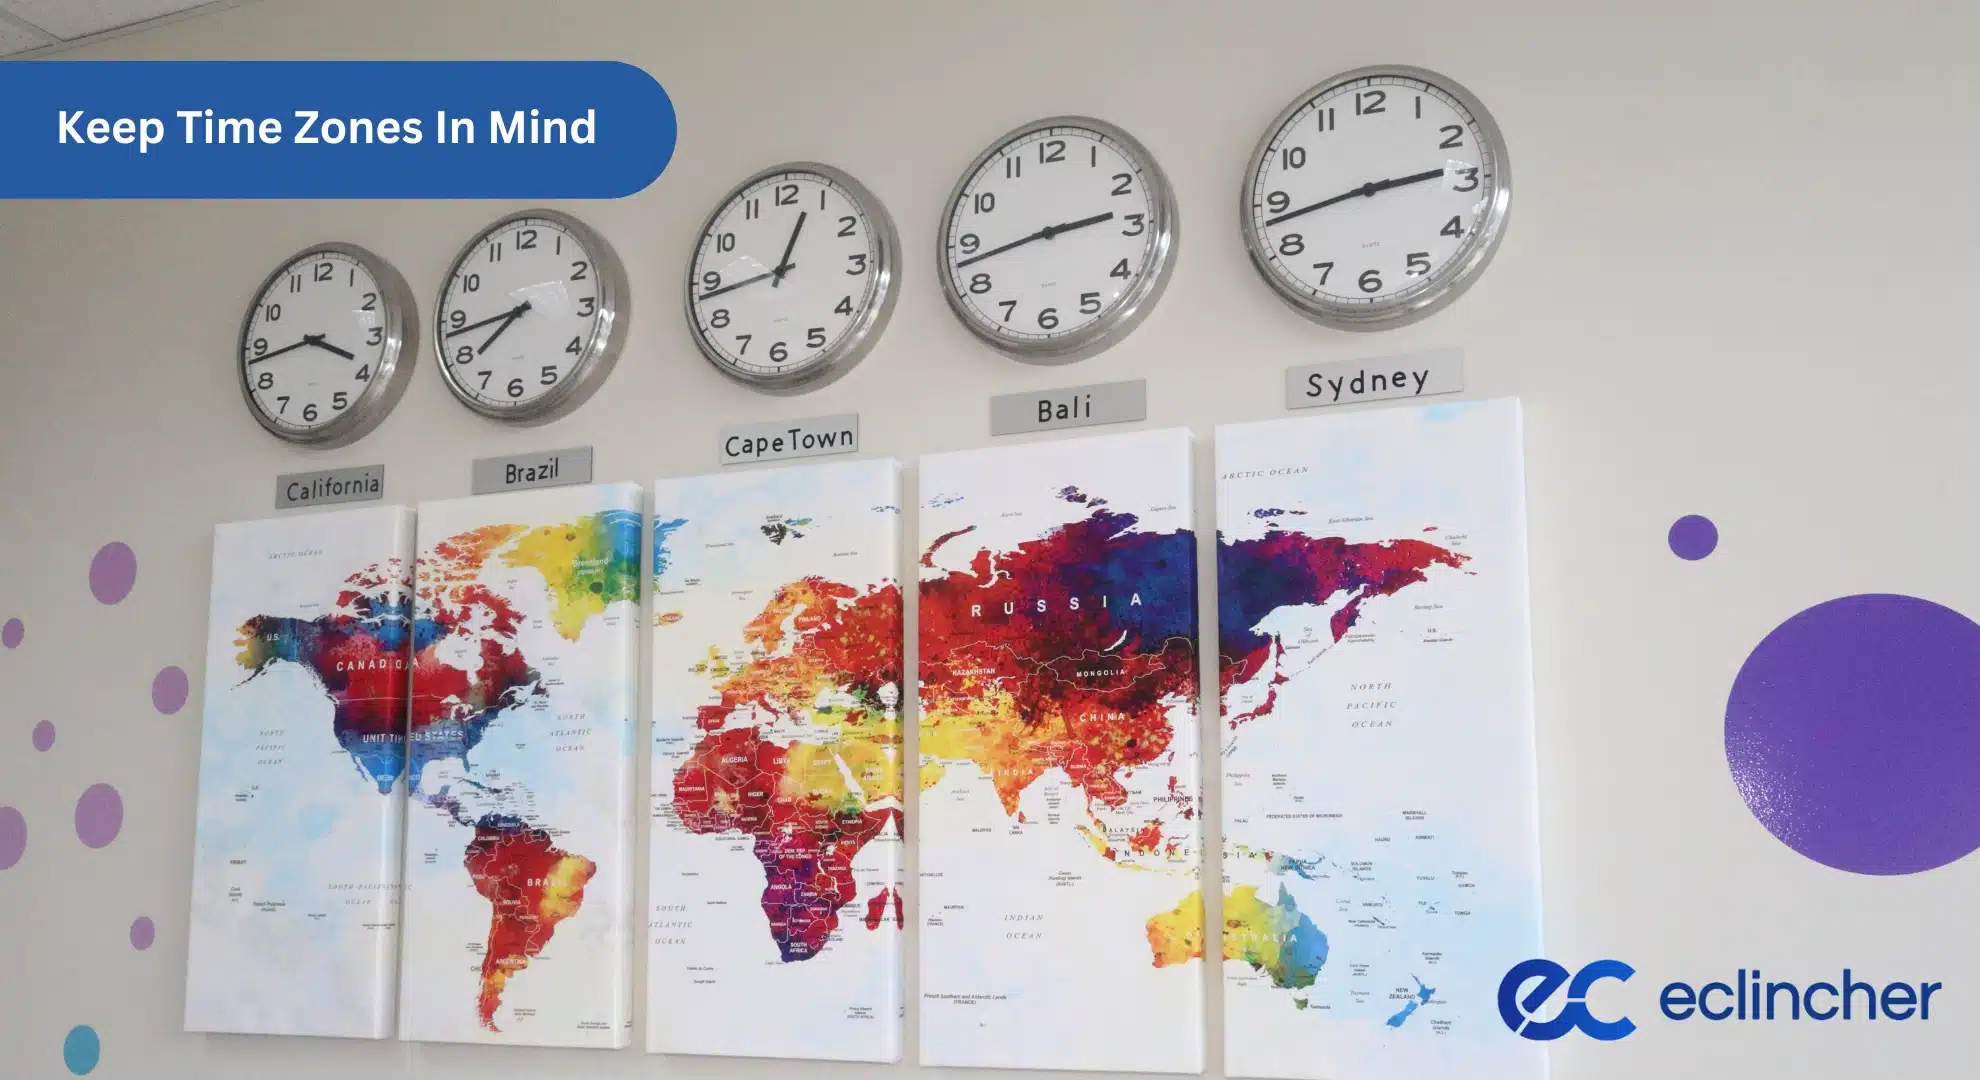 Keep Time Zones In Mind for social media automation